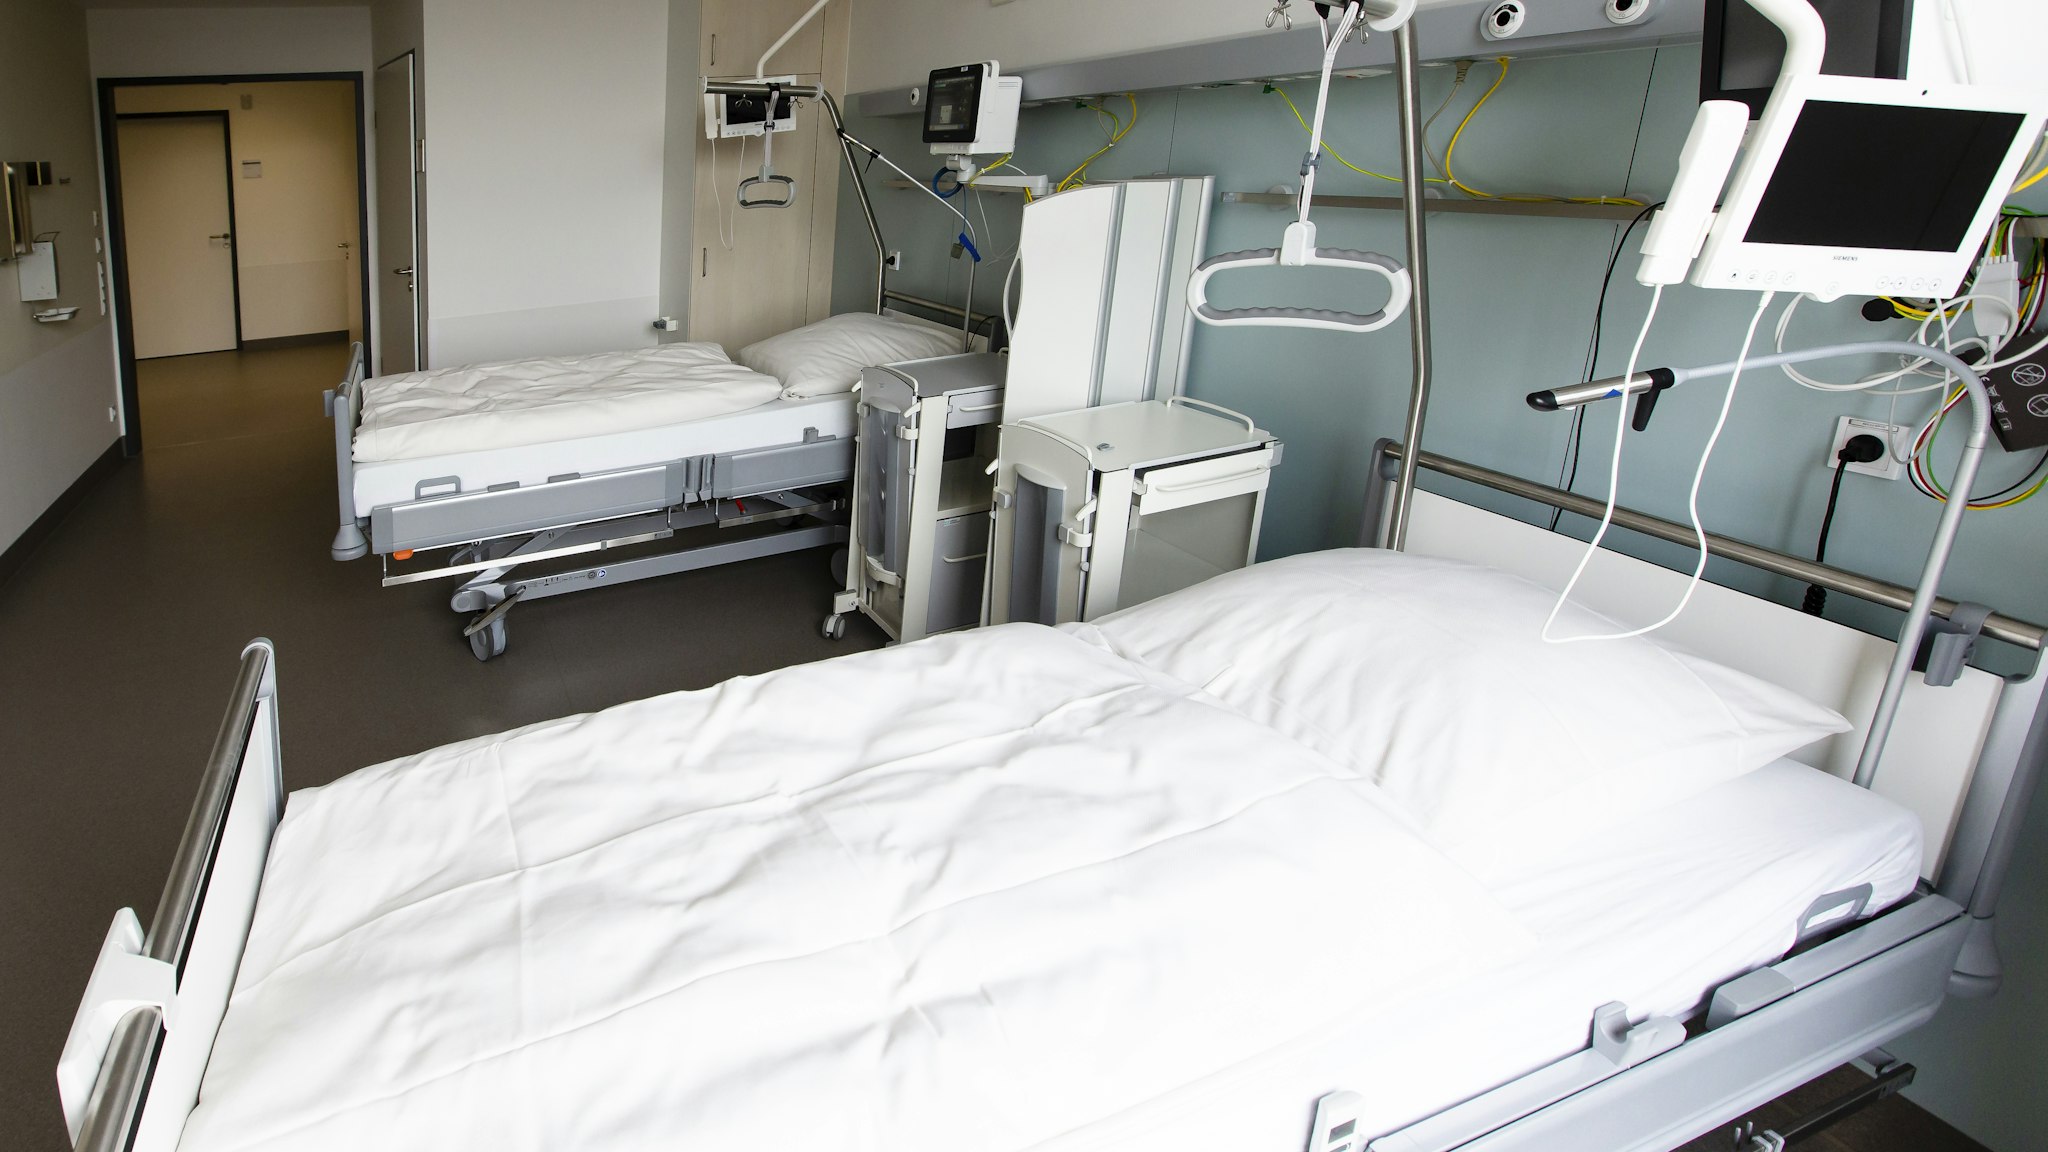 16 August 2019, Schleswig-Holstein, Kiel: Two beds are available in a ward room for patients with statutory health insurance at the University Hospital Schleswig-Holstein (UKSH). After seven years of planning and four years of construction, the more than 300 million UKSH new building of the central building was officially opened on 16 August. Photo: Frank Molter/dpa (Photo by Frank Molter/picture alliance via Getty Images)